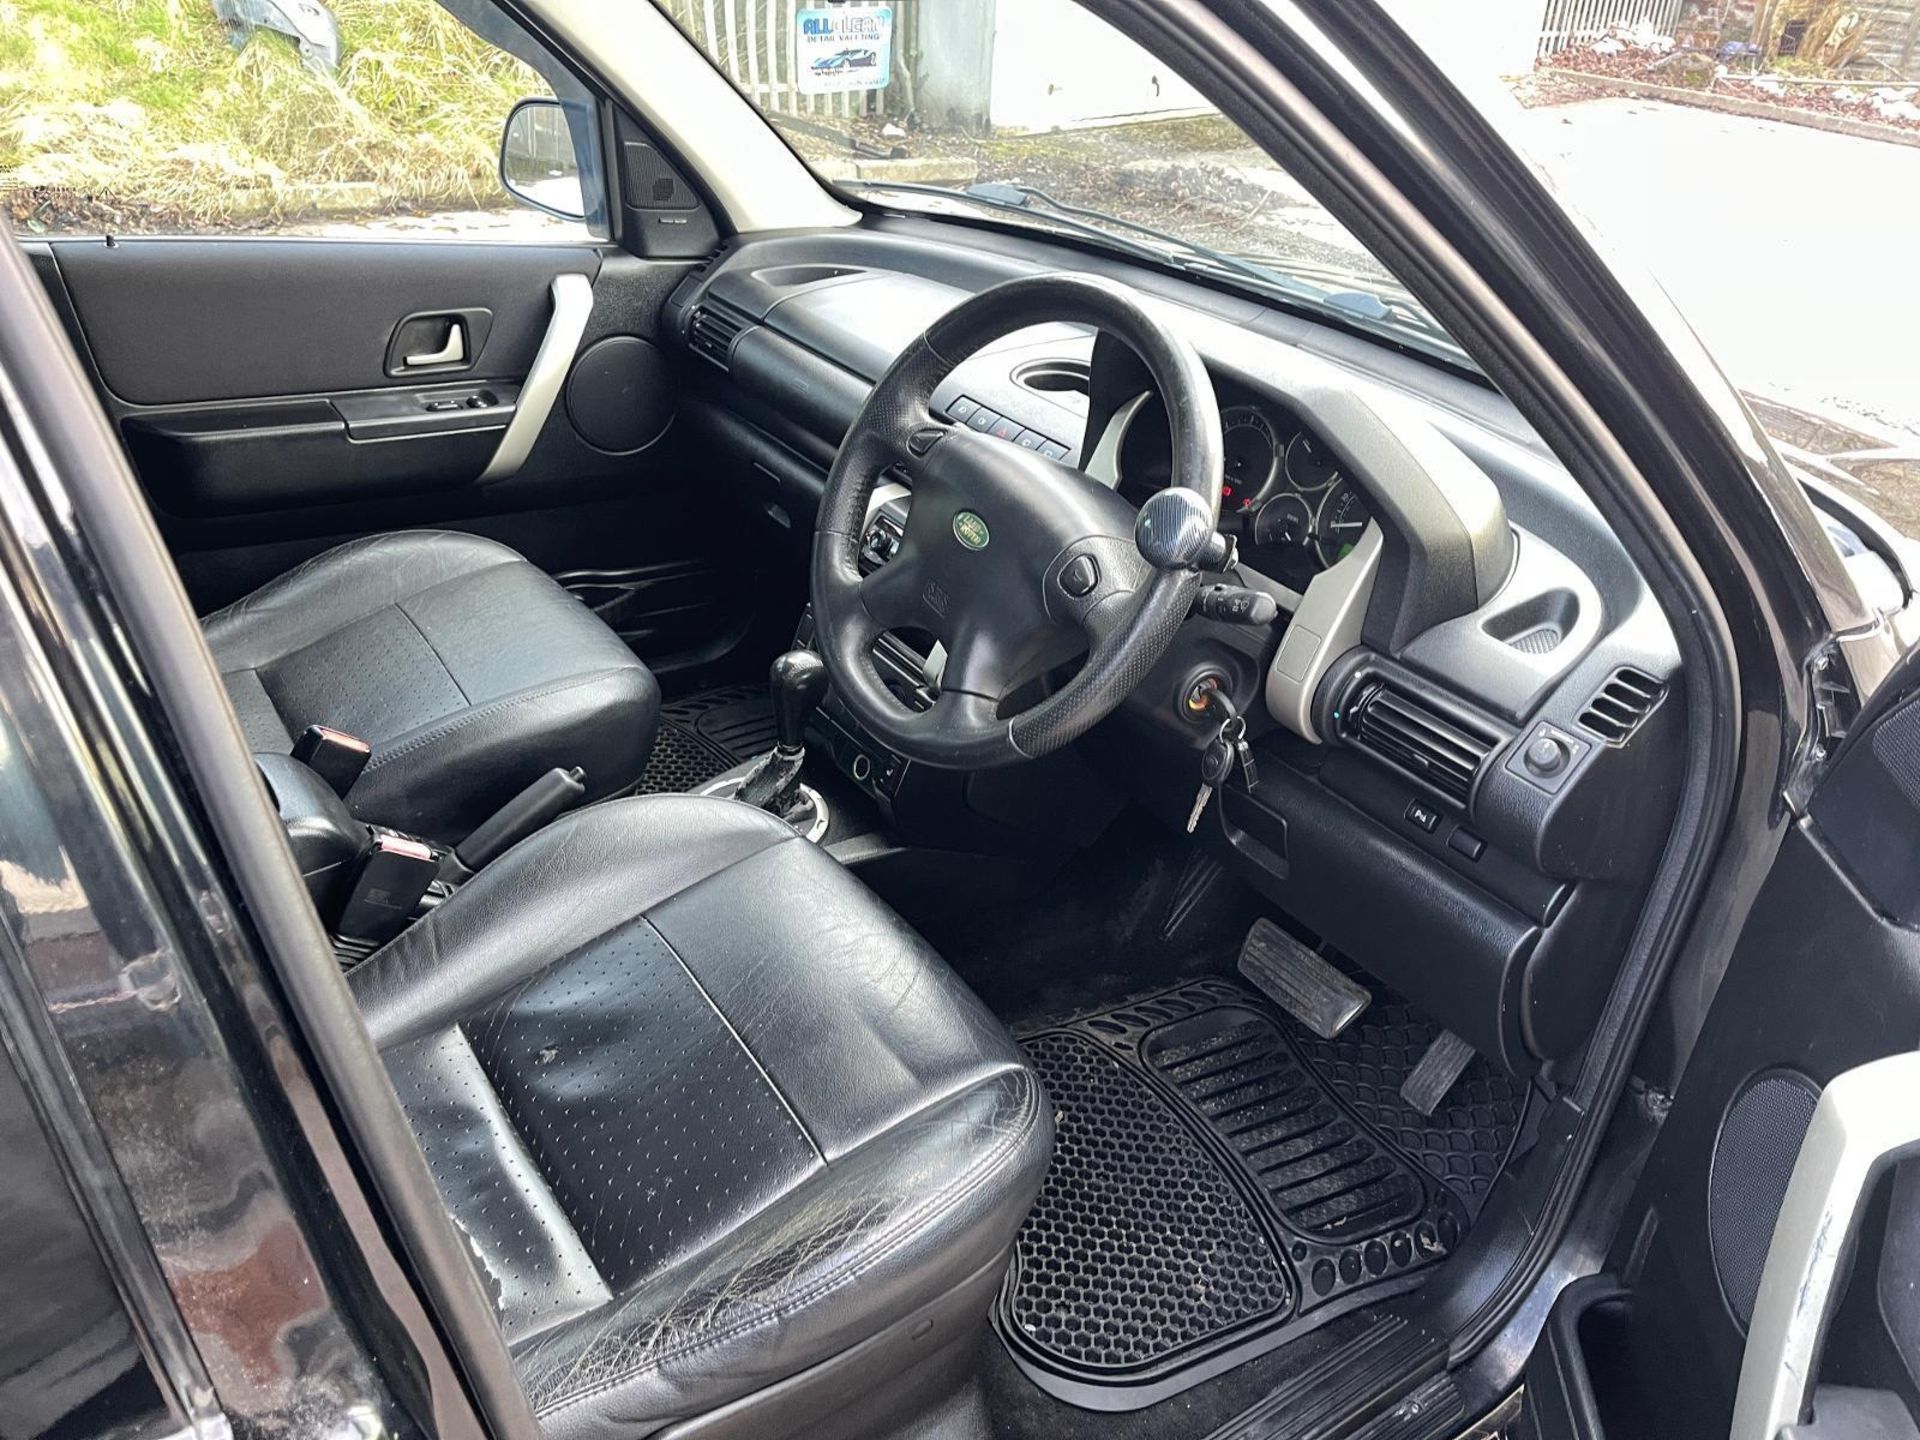 2006 LAND ROVER FREELANDER: DIESEL AUTO WITH LEATHER INTERIOR (NO VAT ON HAMMER) - Image 12 of 12